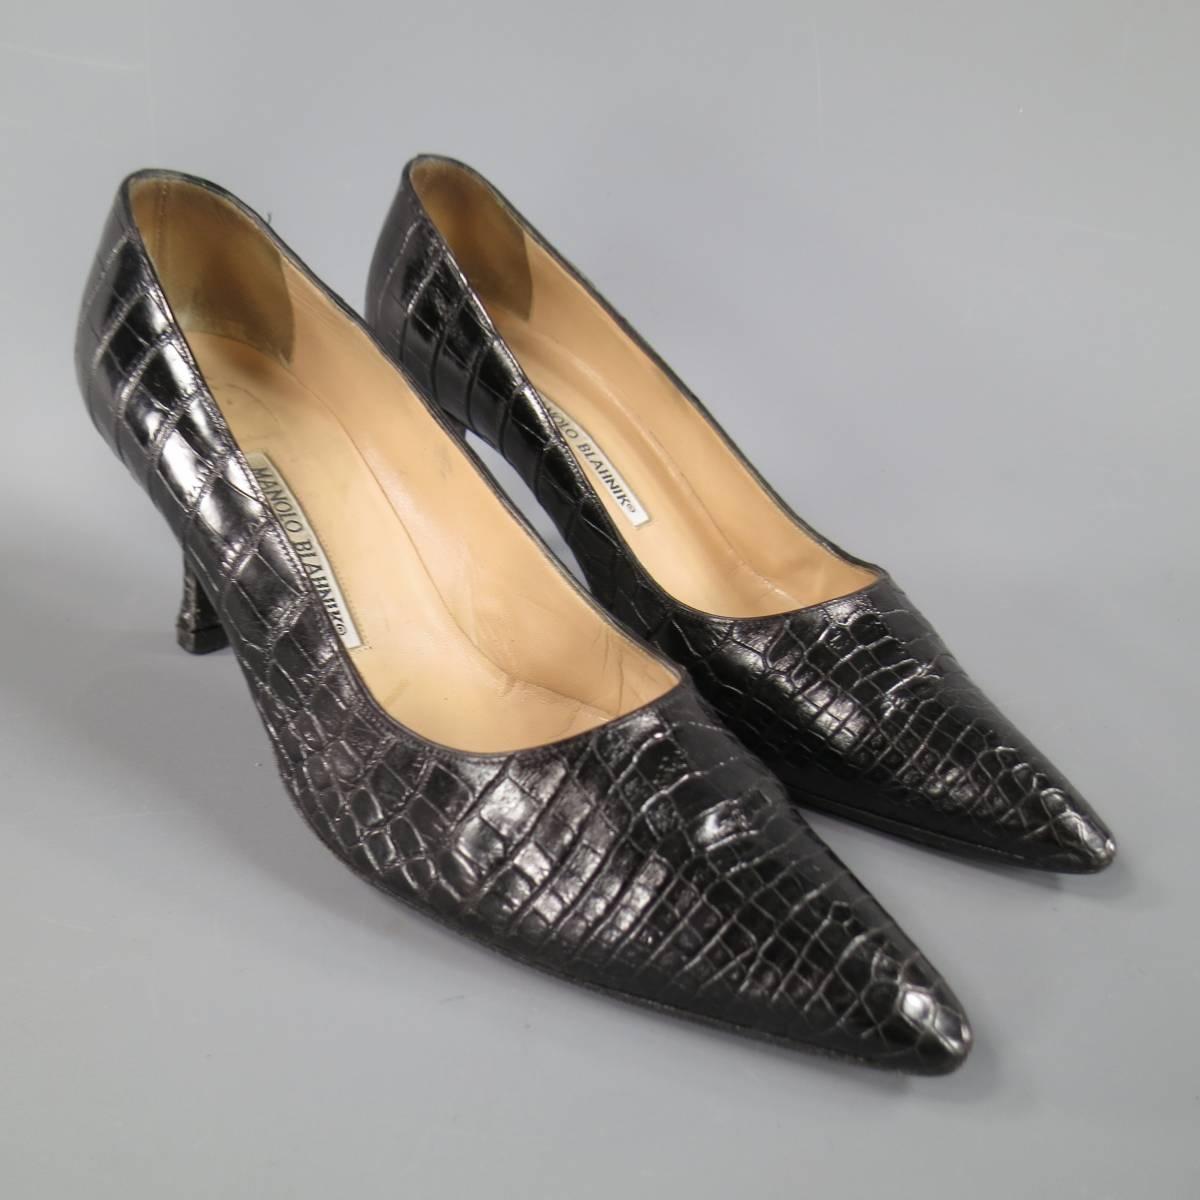 Classic MANOLO BLAHNIK pumps in a black textured alligator skin leather featuring a pointed toe and covered stiletto heel. Resoled. Made in Italy.
Retails: $2,100.00.
 
Good Pre-Owned Condition.
Marked: IT 38
 
Heel: 3 in.